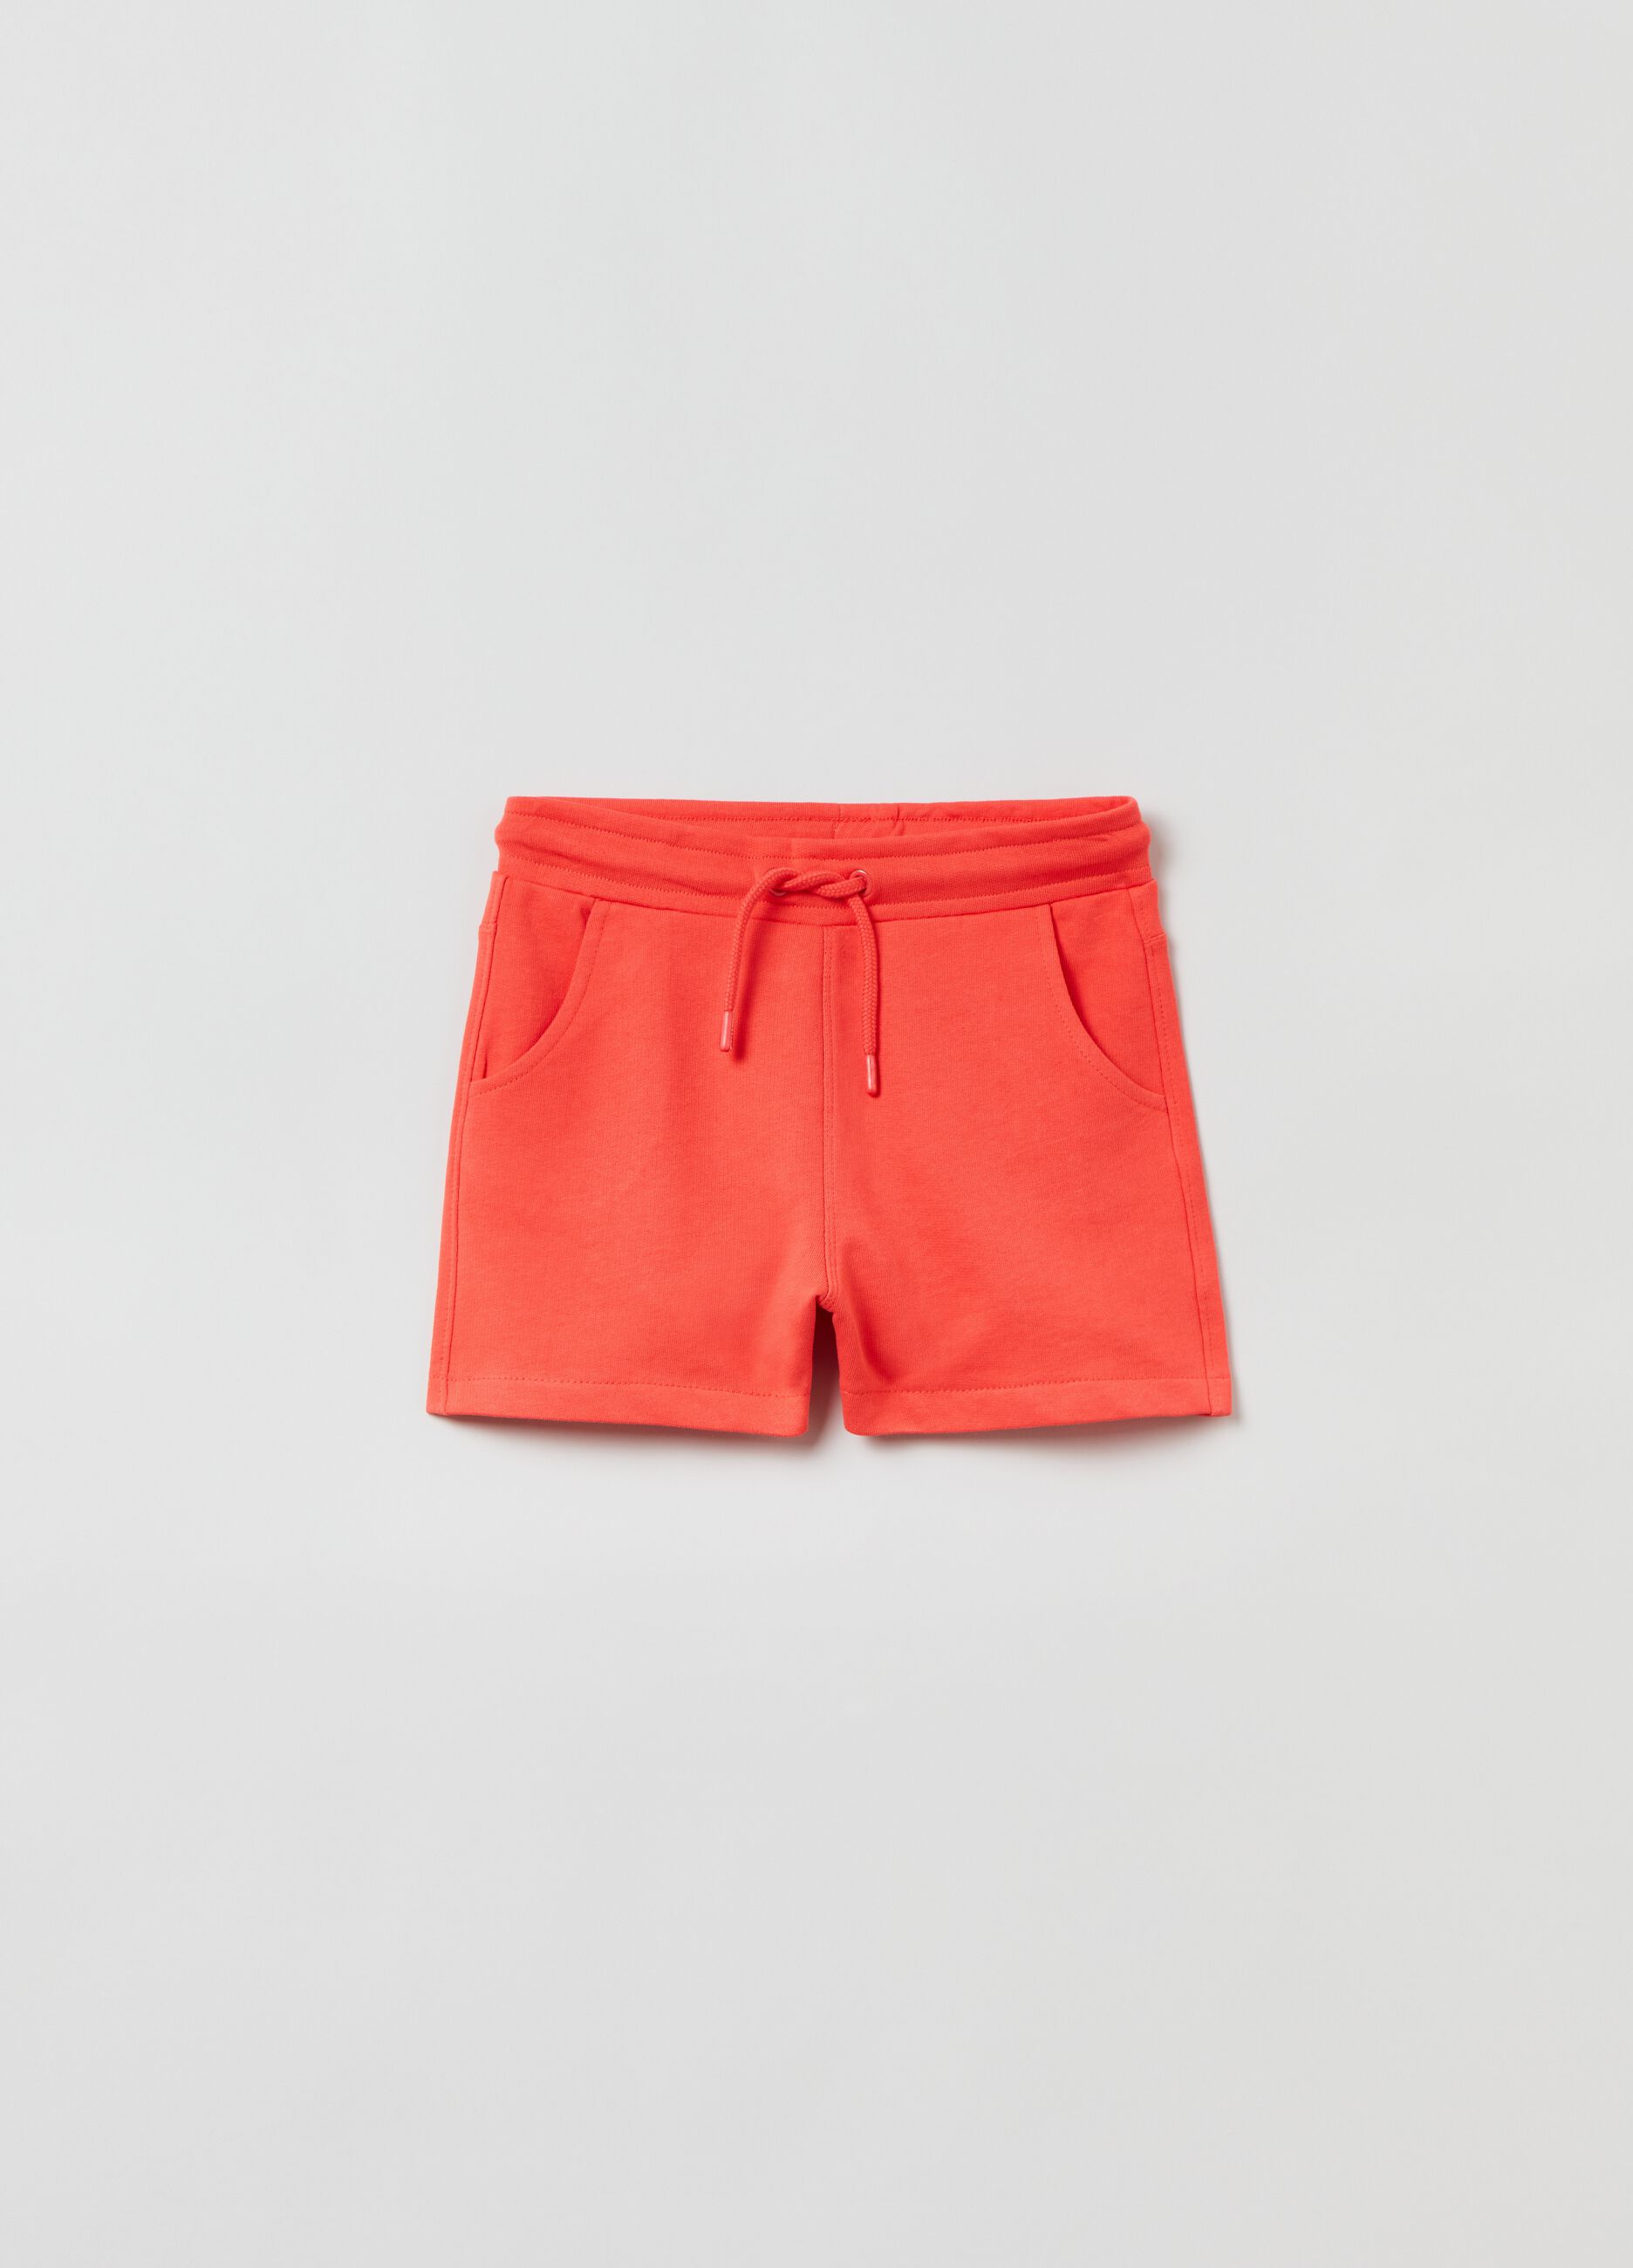 French terry shorts